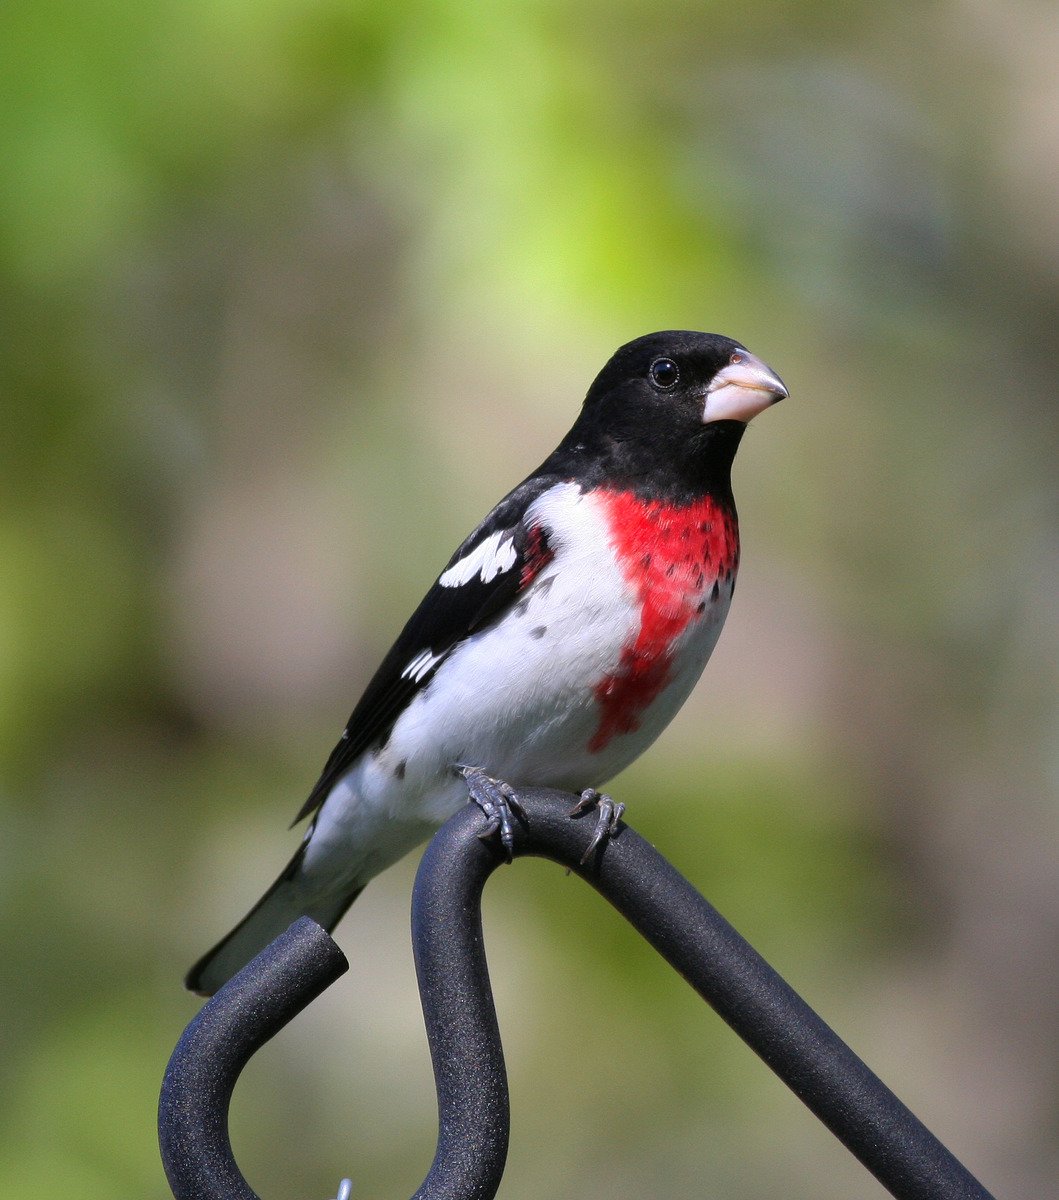 a red and white bird sitting on a black metal gate